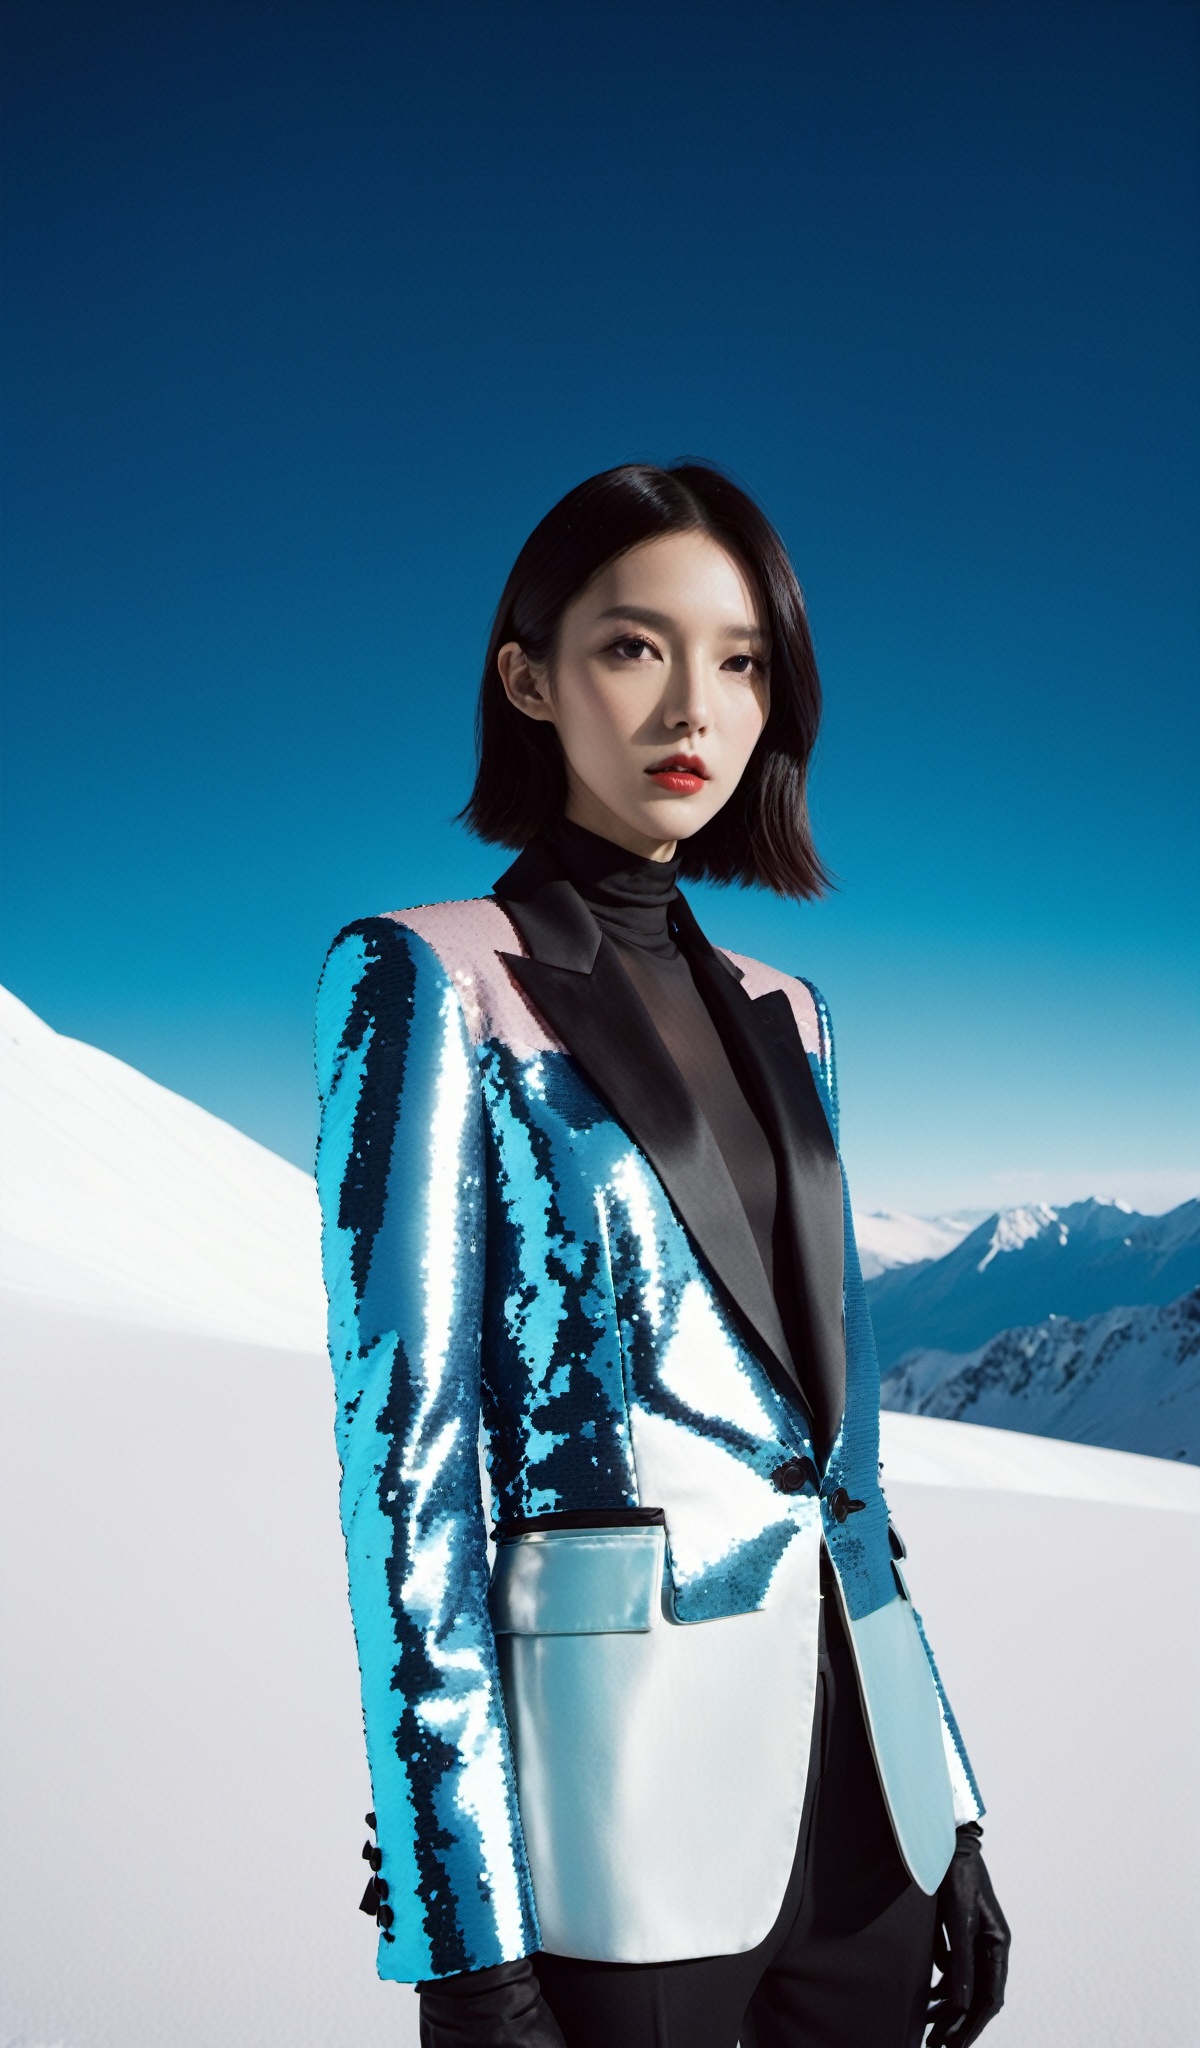 lovecraftian horror , eldritch, cosmic horror, unknown, mysterious, surreal, highly detailed, Fujifilm FP-100C, Tom Ford sequin-embellished tuxedo jacket with satin lapels, positive space composition, Rick Owens (瑞克·欧文斯), girl, 1girl, solo,Snow Mountain,coocolor,FilmGirl